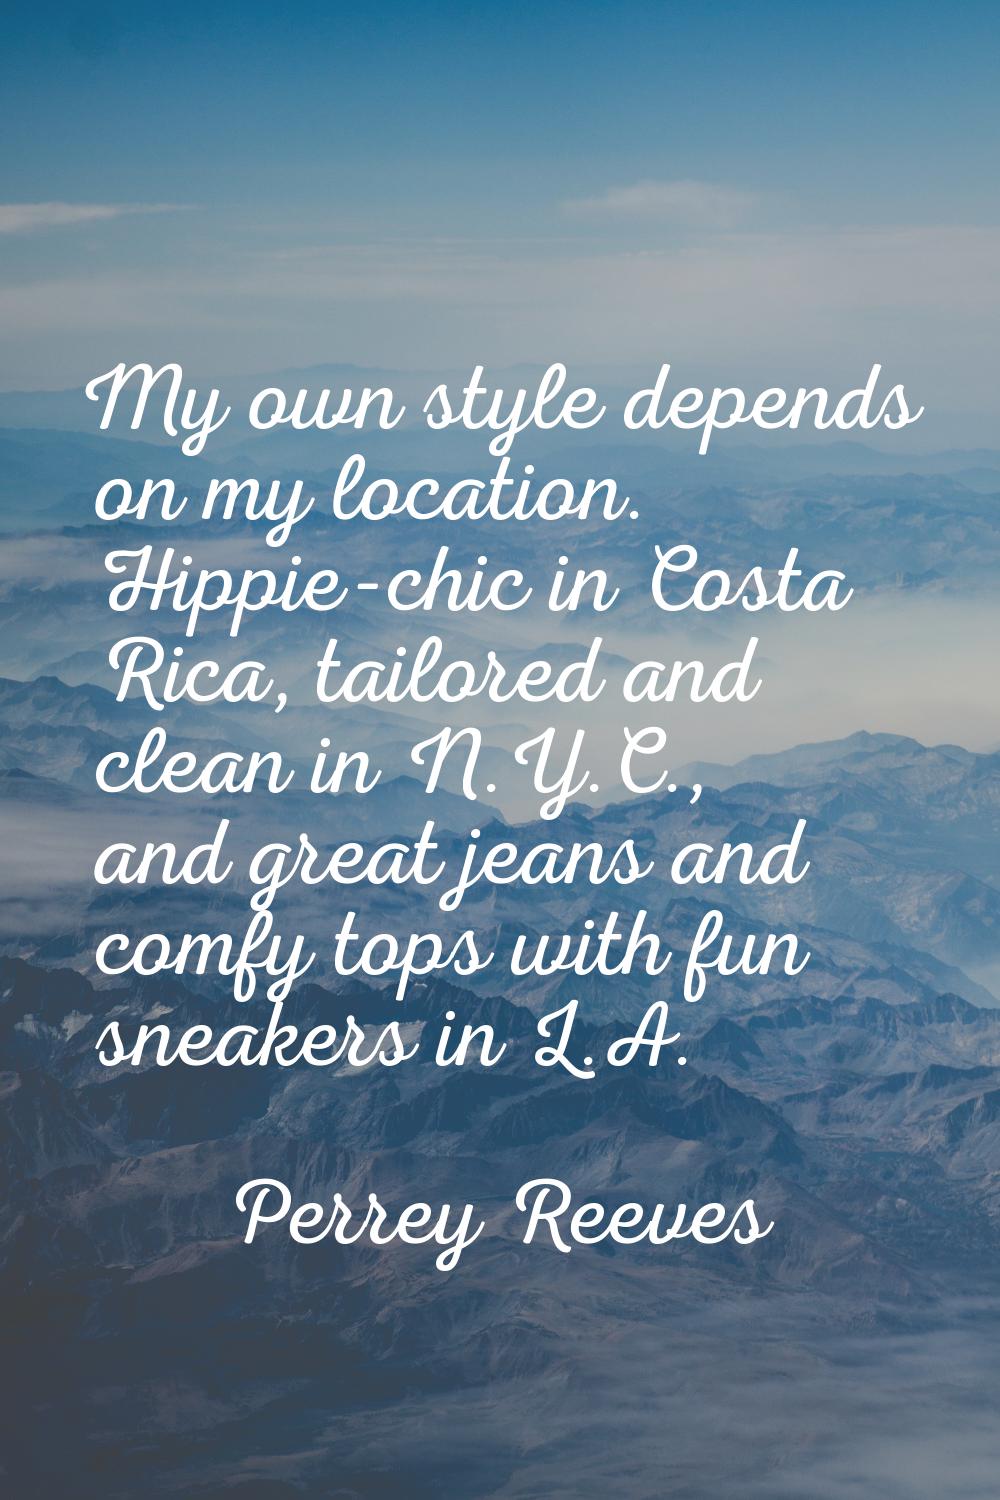 My own style depends on my location. Hippie-chic in Costa Rica, tailored and clean in N.Y.C., and g